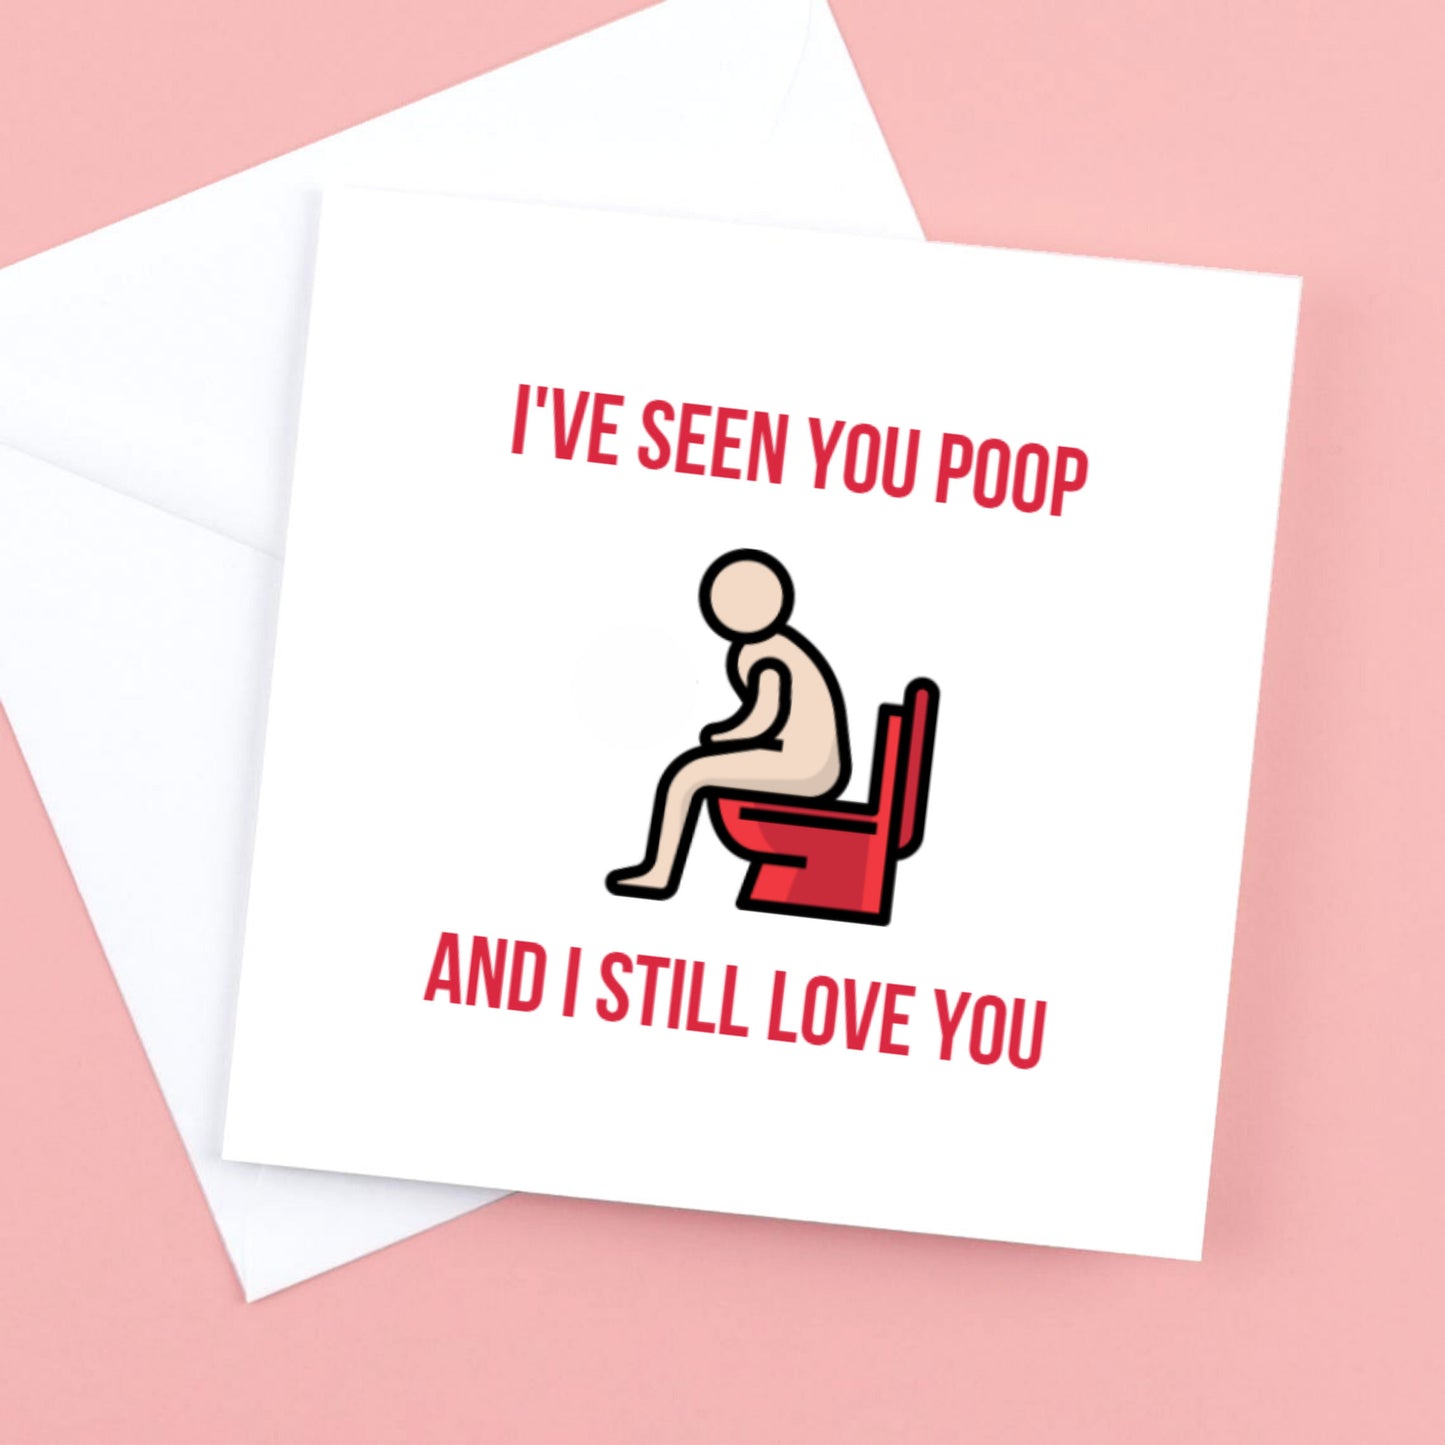 I've seen you poop and I still love you card